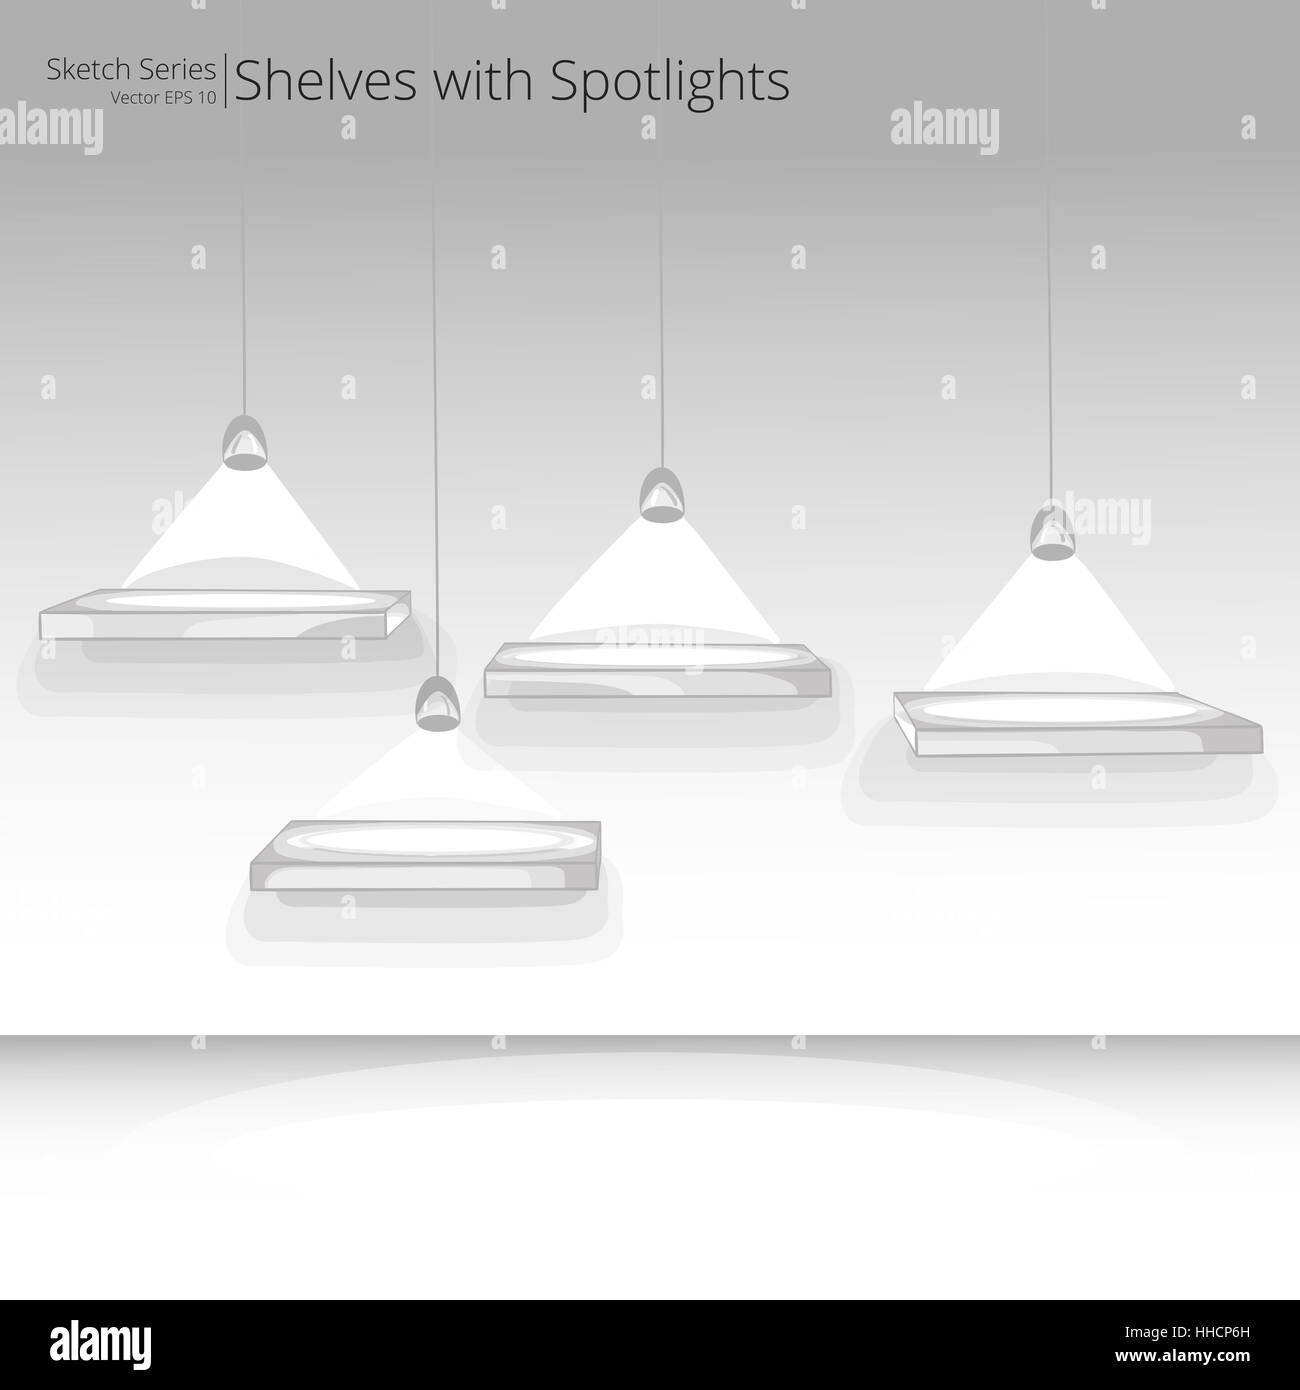 Illustration Sketch of interior Shelves on Wall with Spotlights. Stock Photo